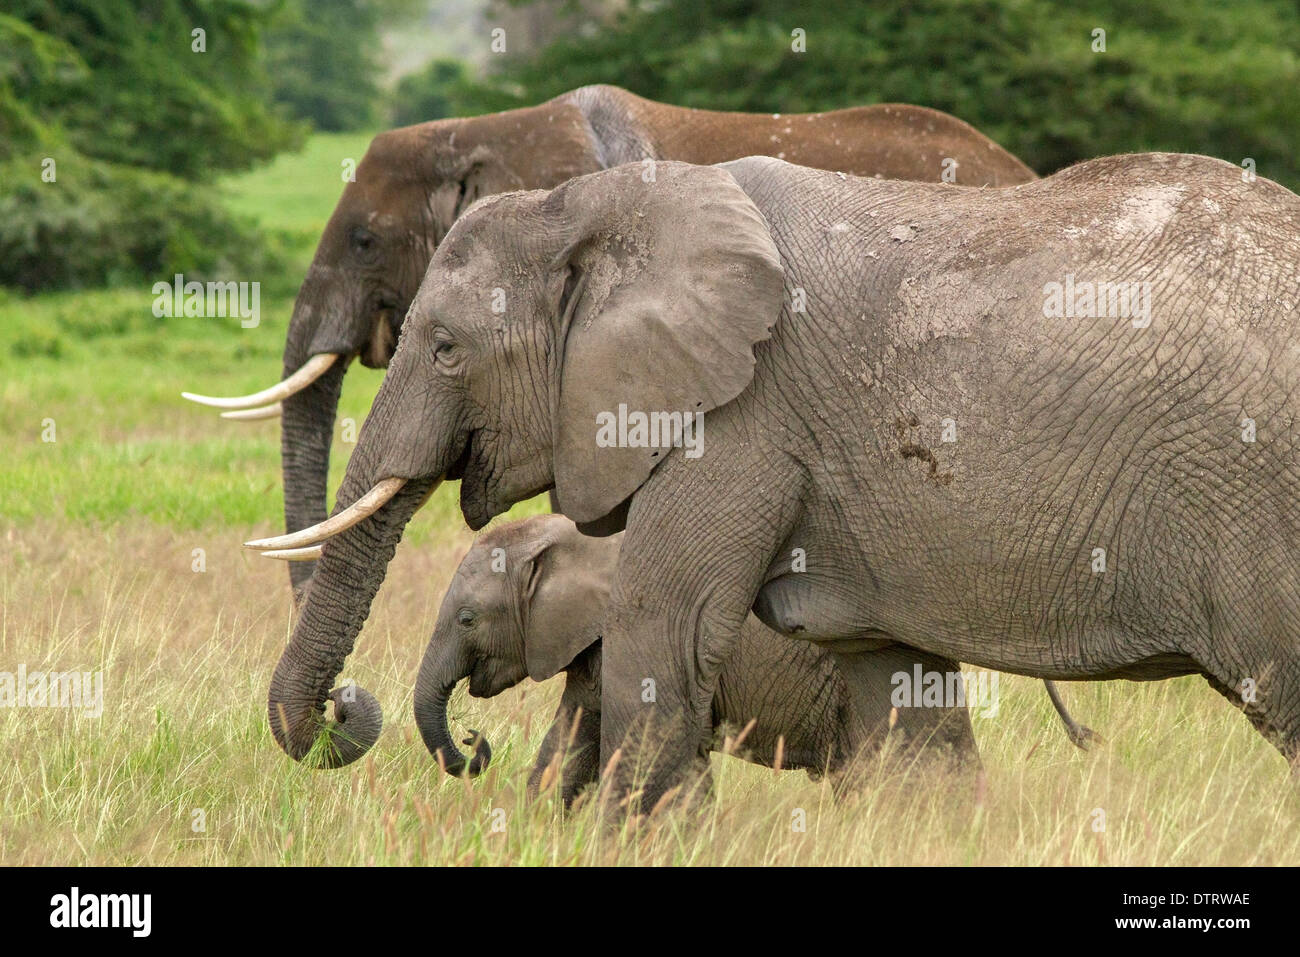 An African elephant family  in Amboseli National Park, Kenya, Africa Stock Photo